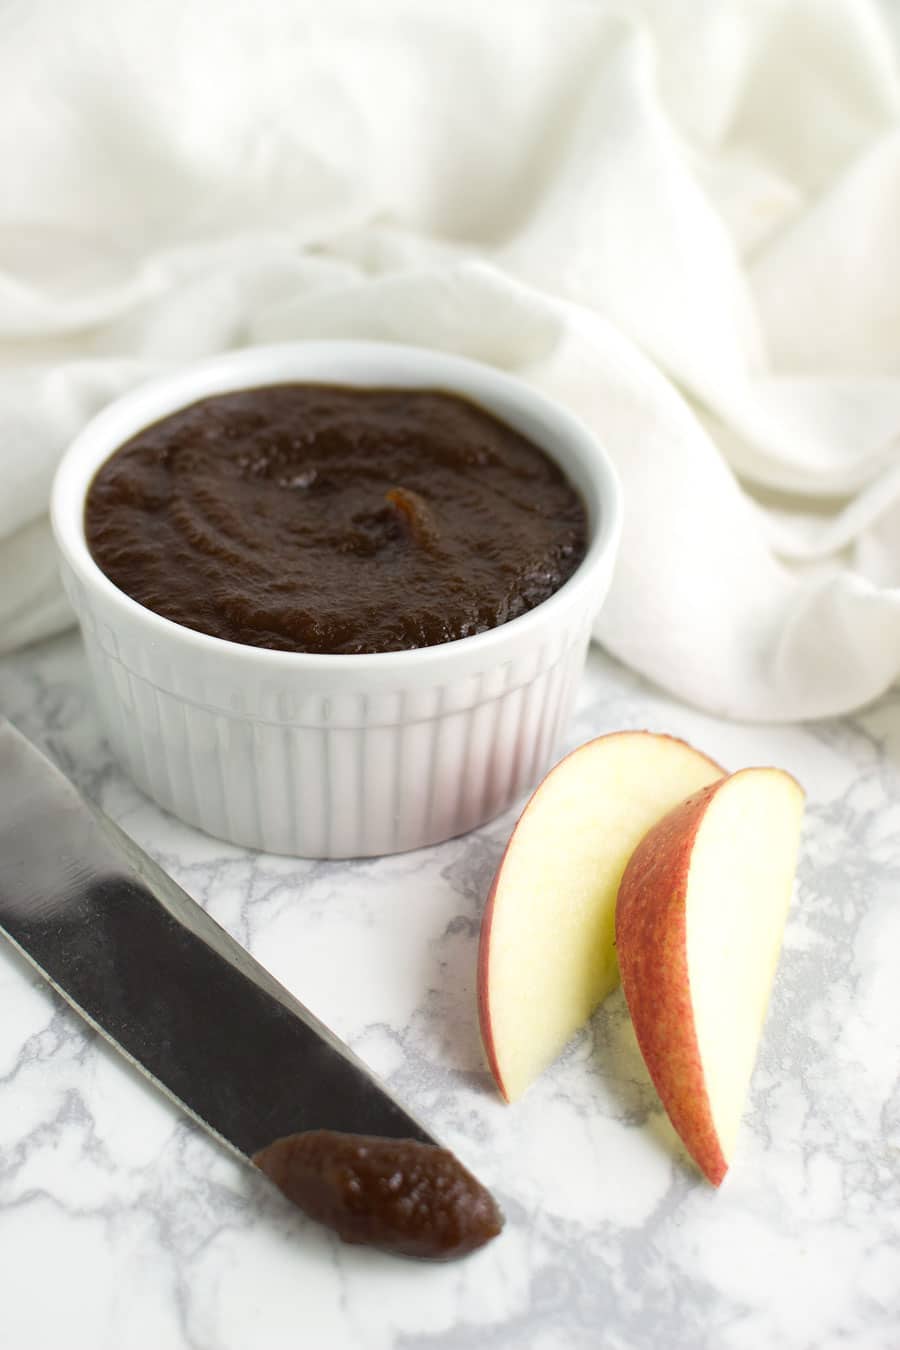 Apple Butter recipe from acleanplate.com #aip #autoimmuneprotocol #paleo